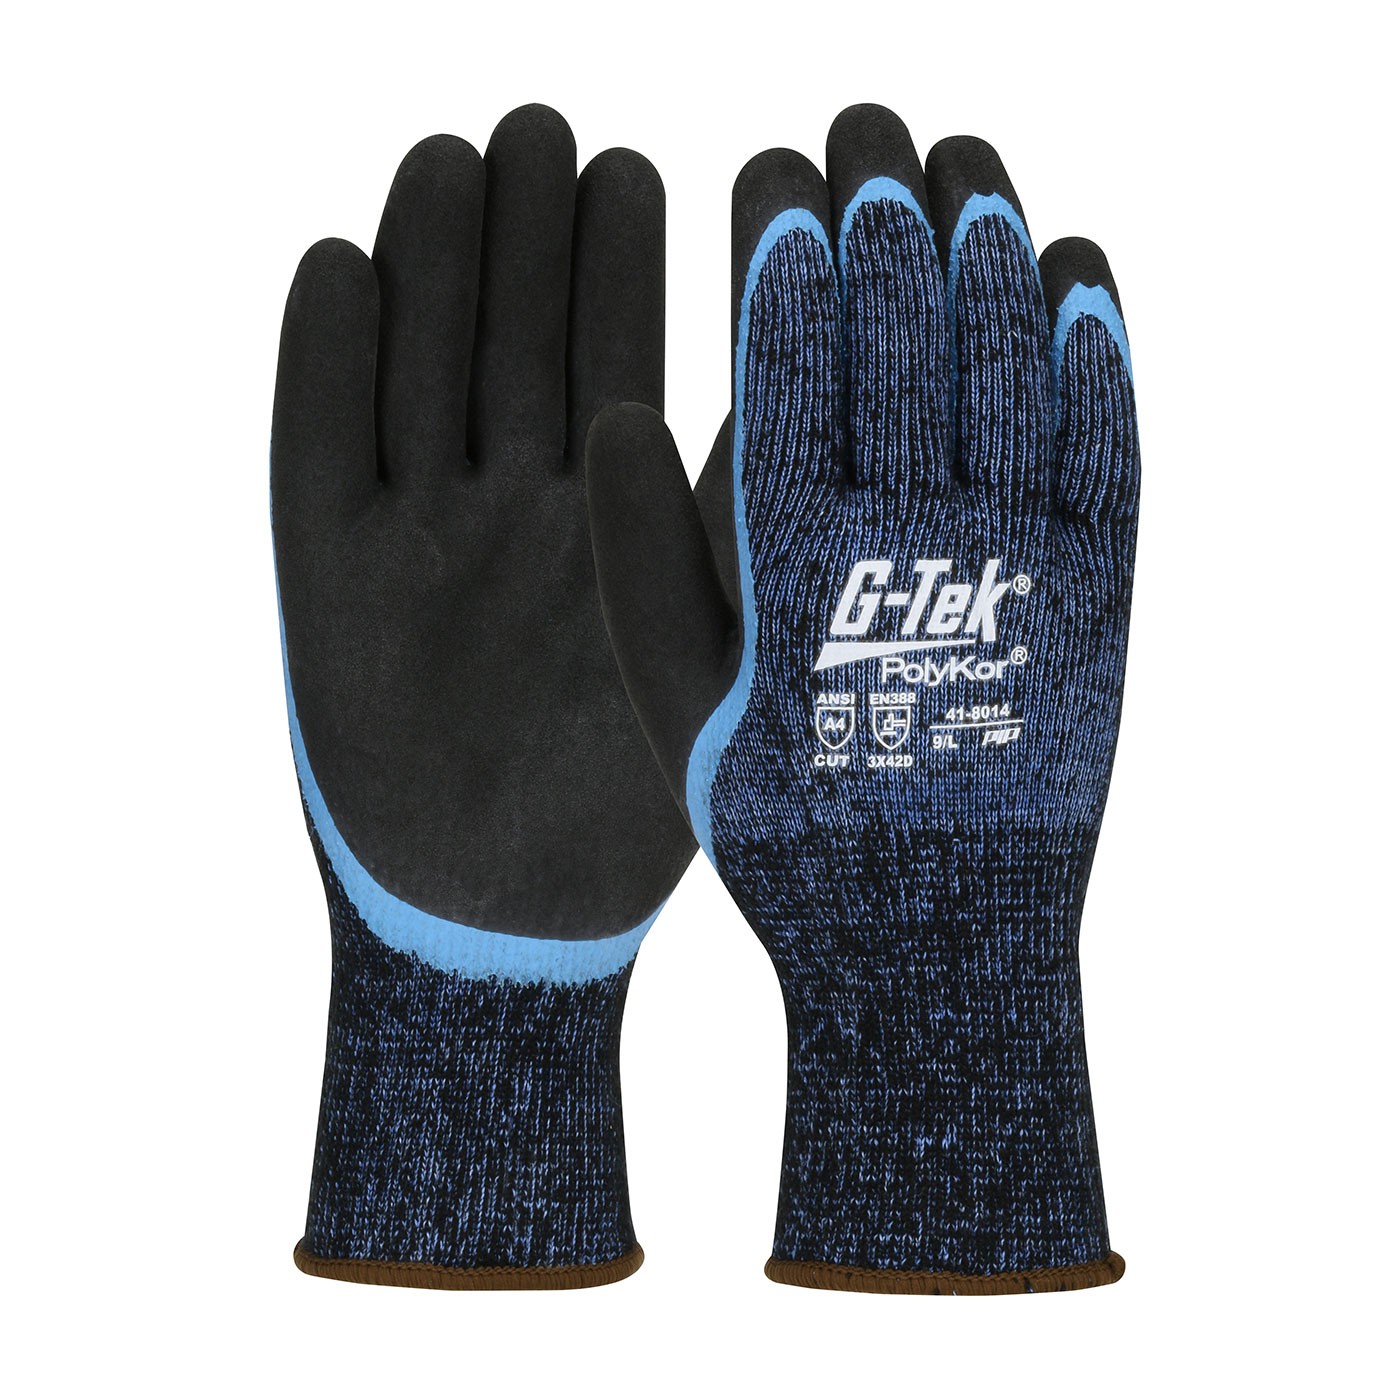 G-Tek® PolyKor® Seamless Knit Single-Layer PolyKor® / Acrylic Blended Glove with Double-Dipped Latex Coated MicroSurface Grip on Palm & Fingers  (#41-8014)